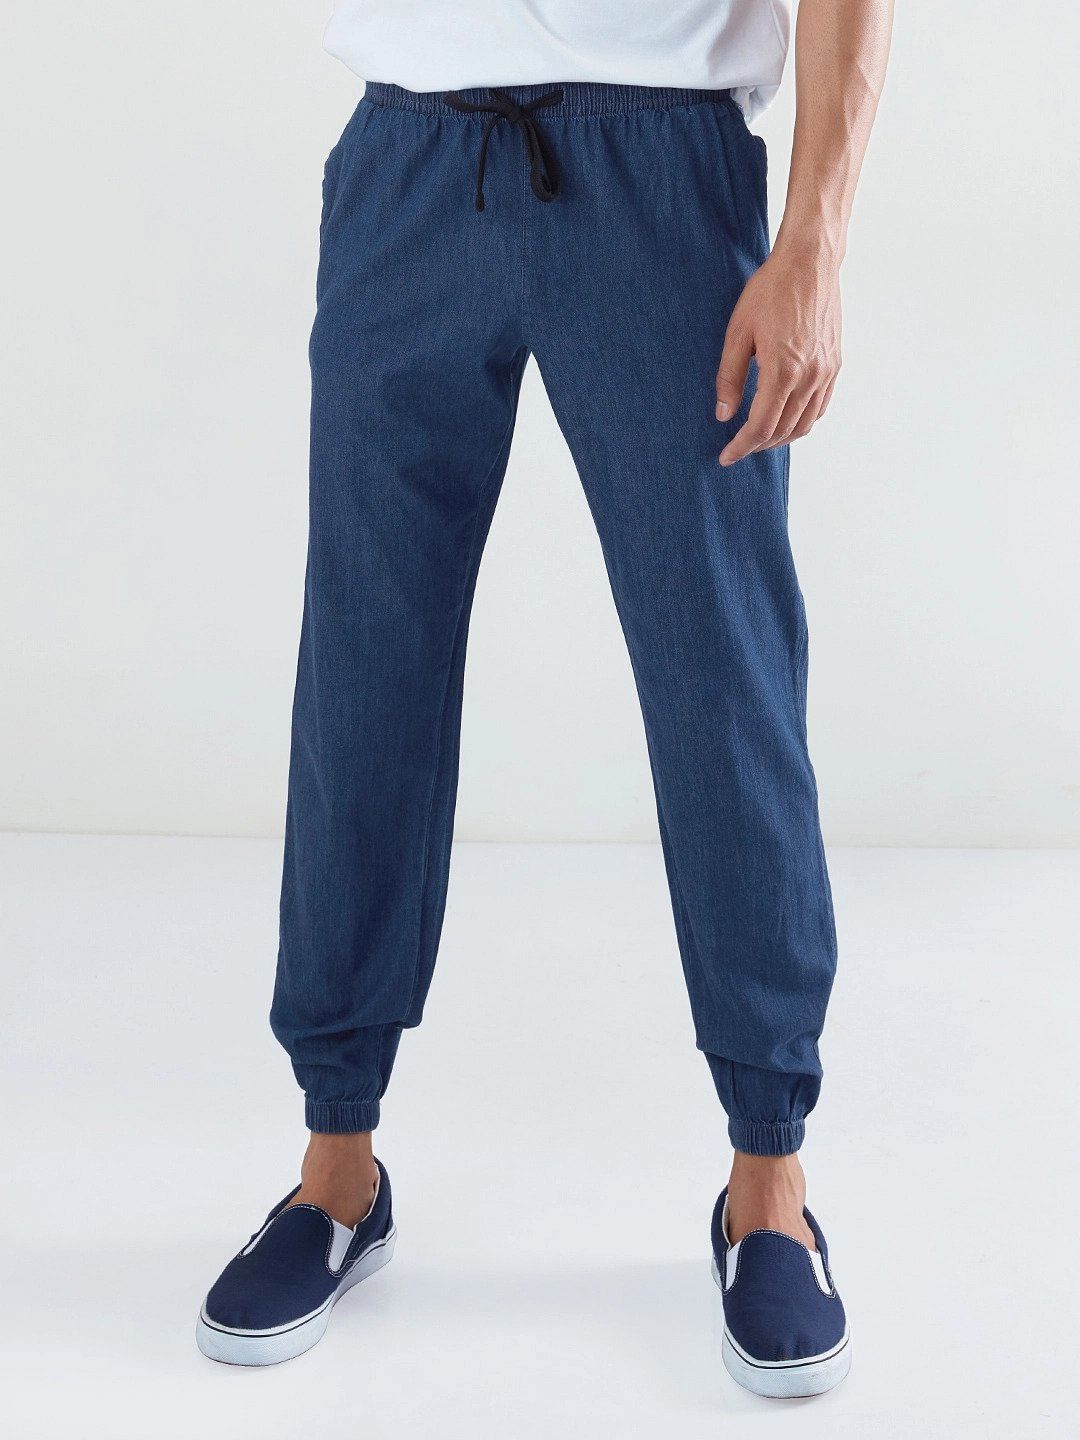 Buy Solids: Navy Blue Joggers online at The Souled Store.